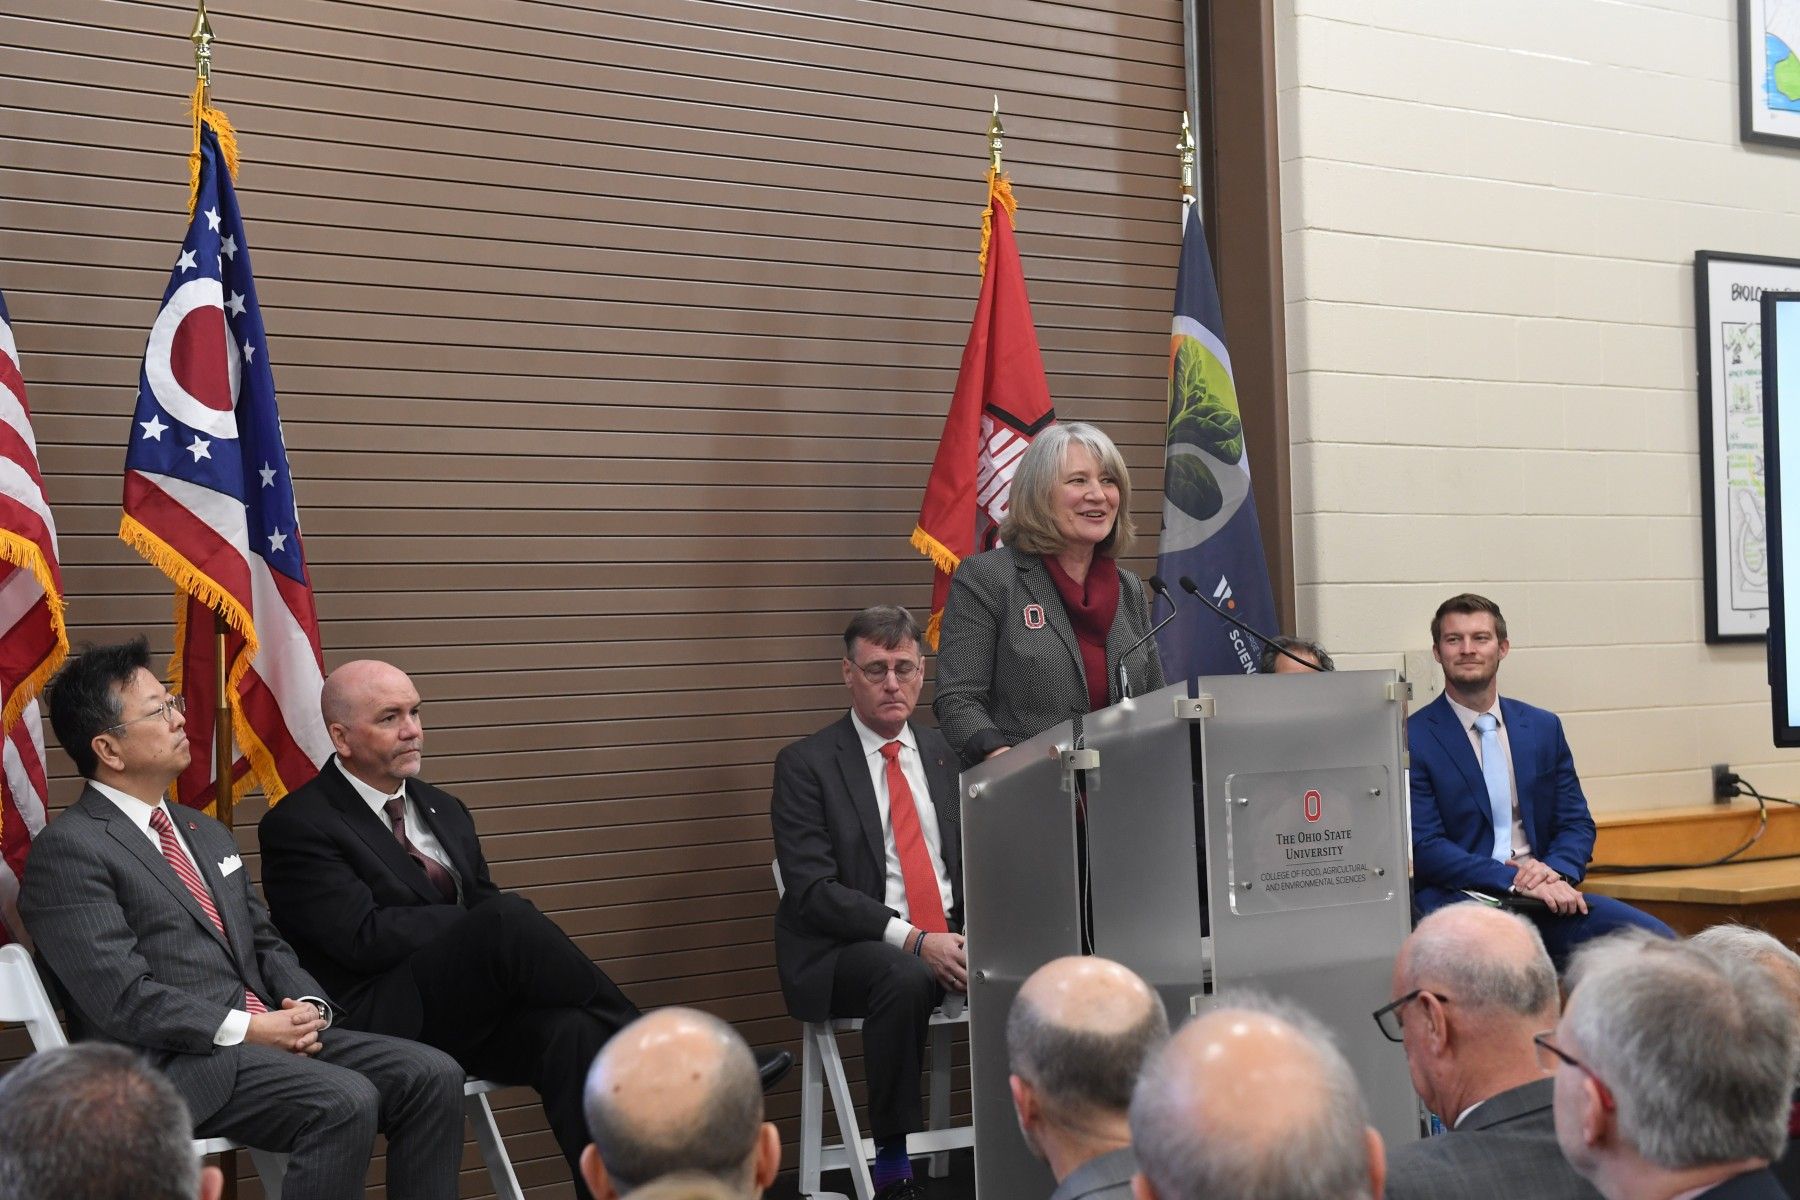 Cathann Kress, dean of the College of Food, Agricultural, and Environmental Sciences, addresses the grand opening audience with other officials behind her.